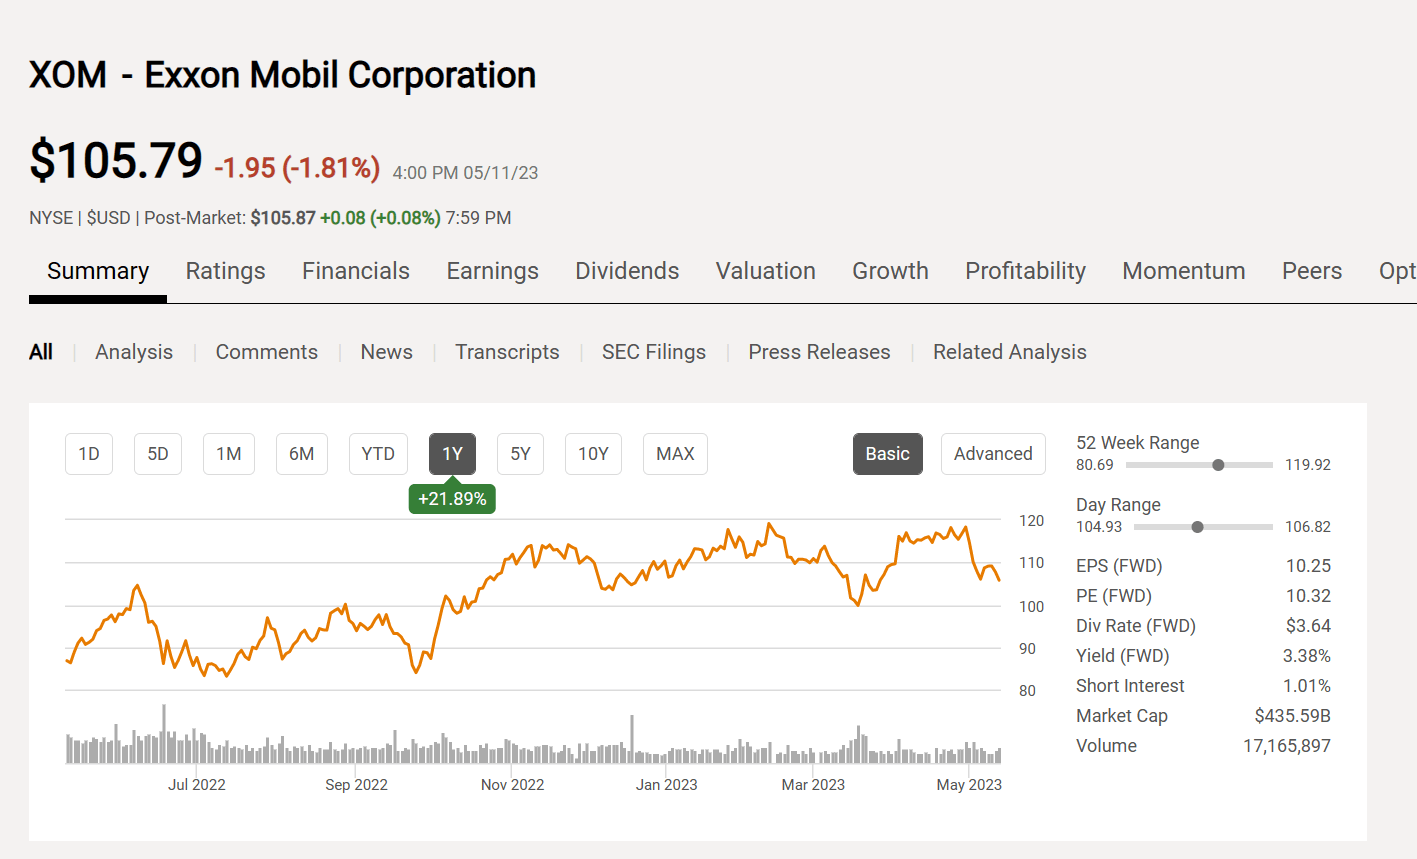 Exxon Mobil Stock After The First Quarter Earnings (NYSEXOM